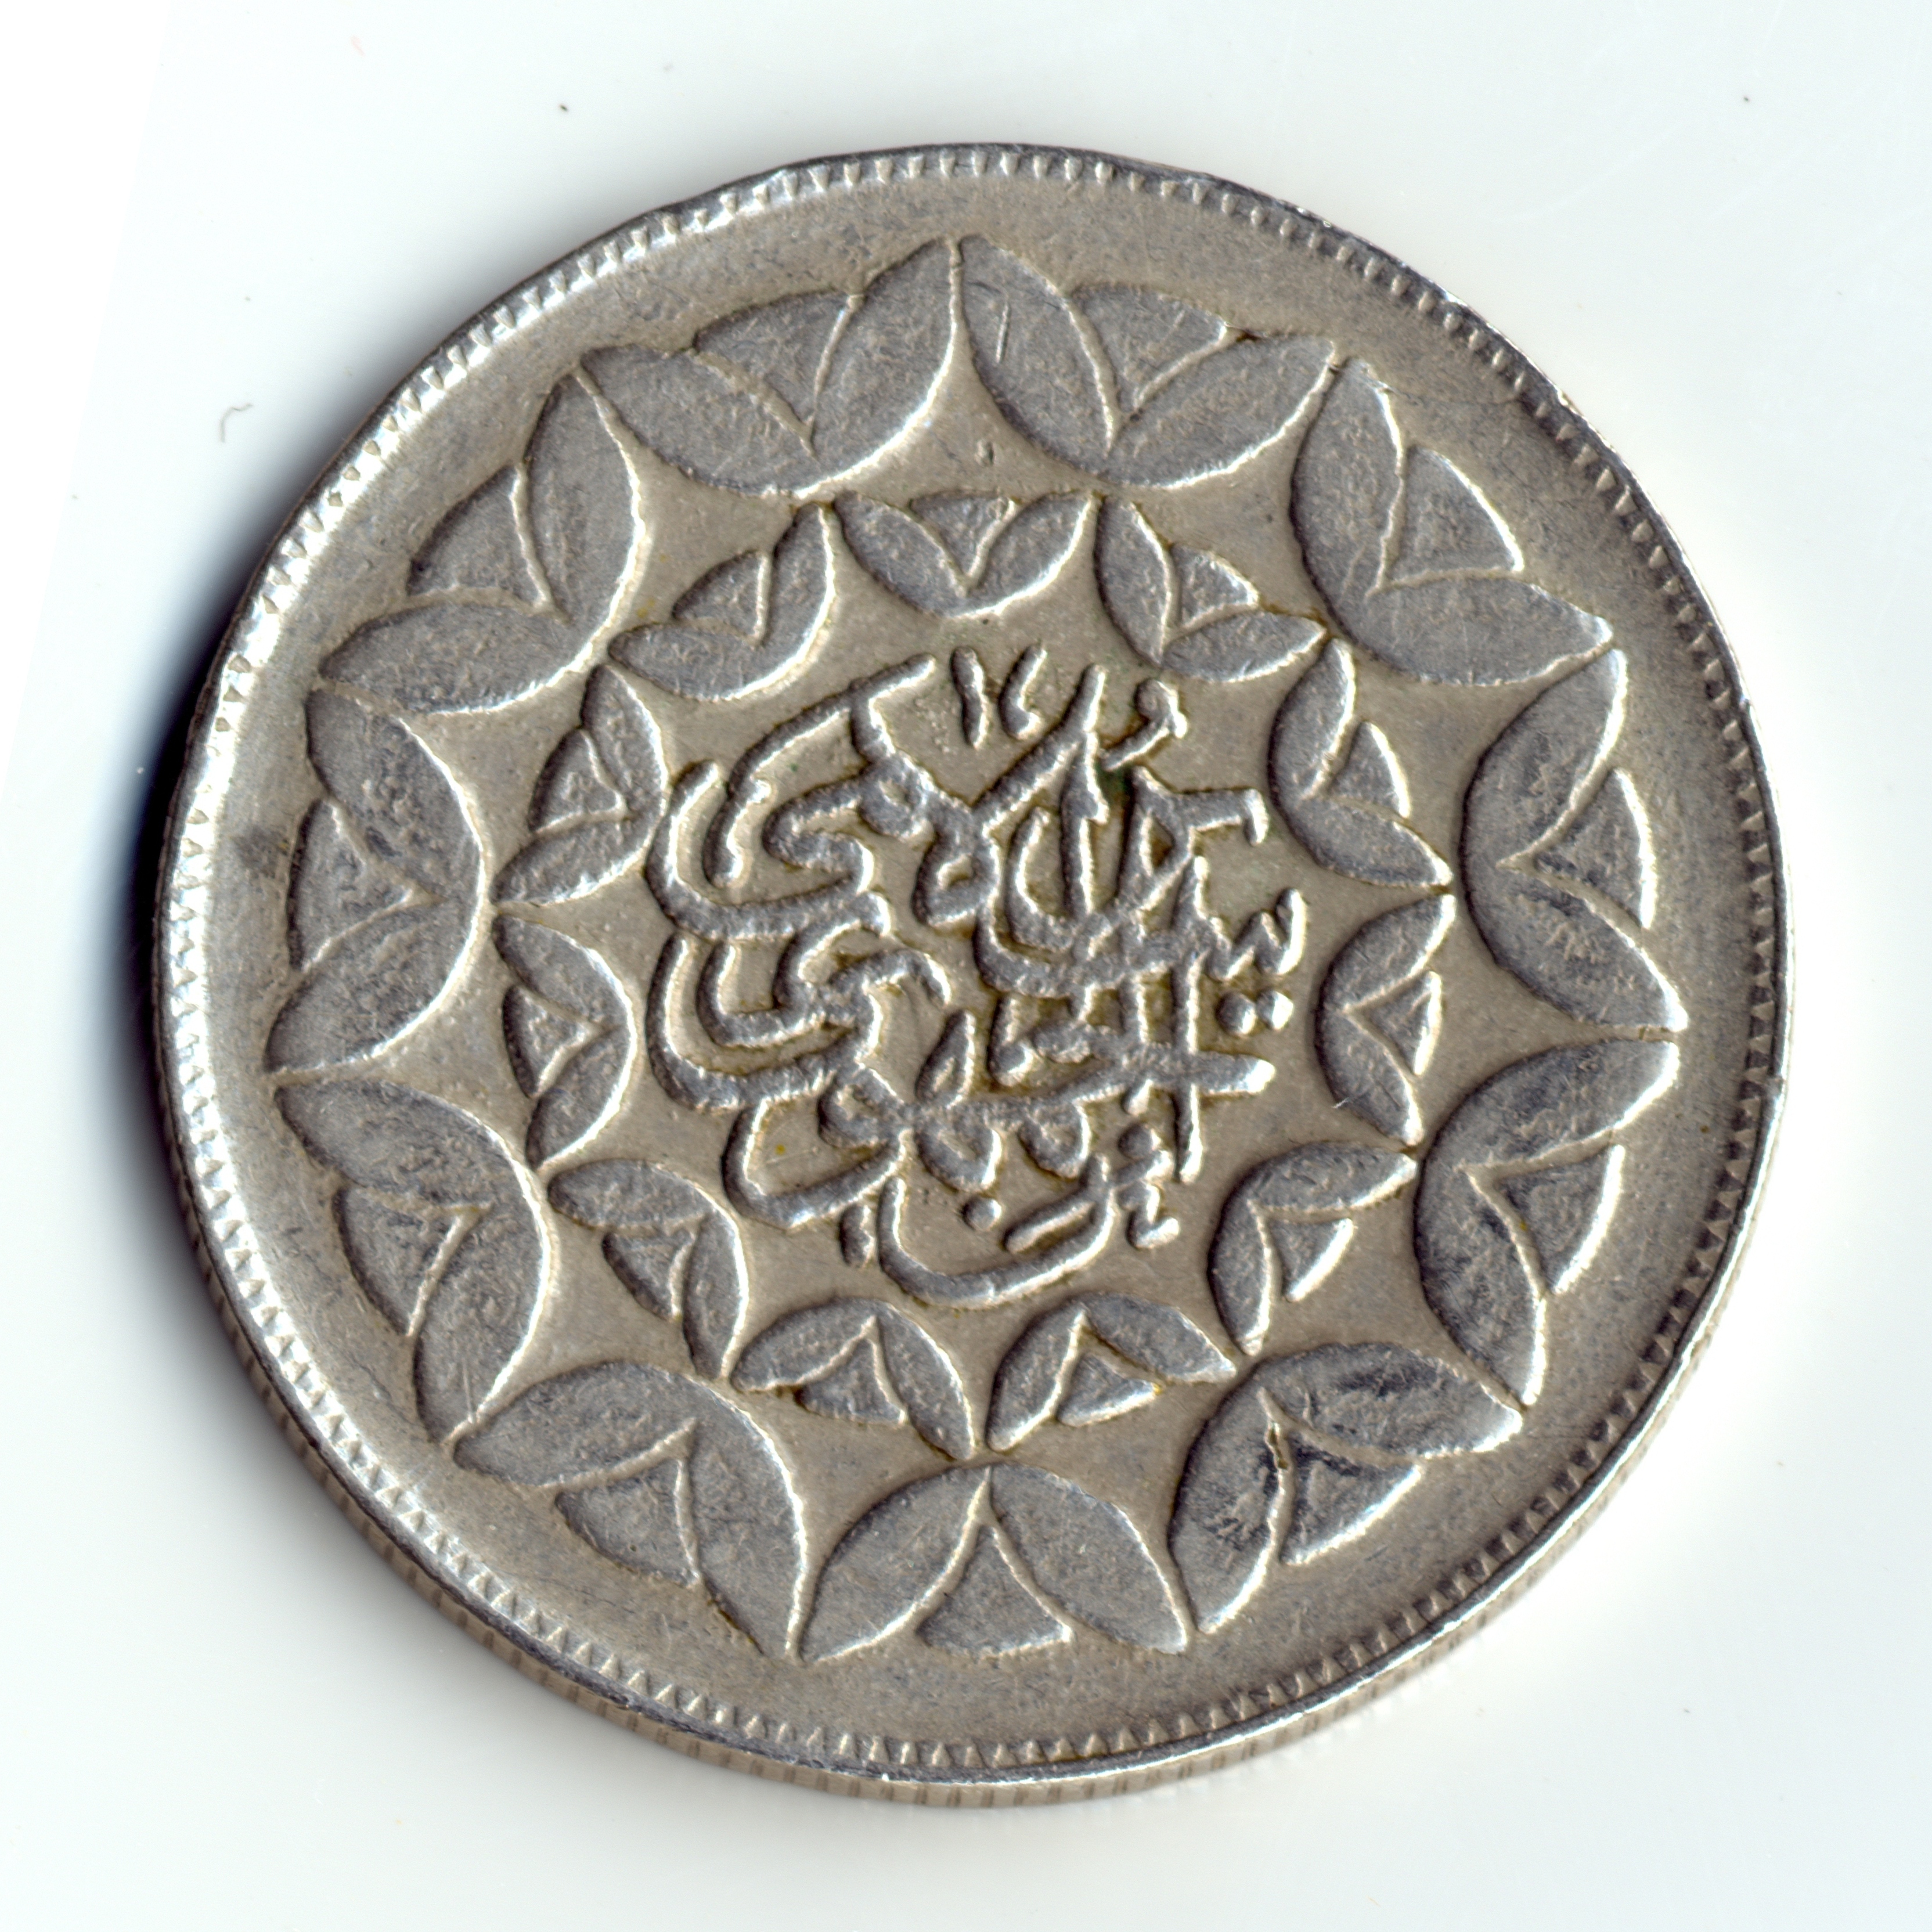 Obverse of Iranian 20 Rials coin - monument of 3rd anniversary of Islamic revolution (cropped square)